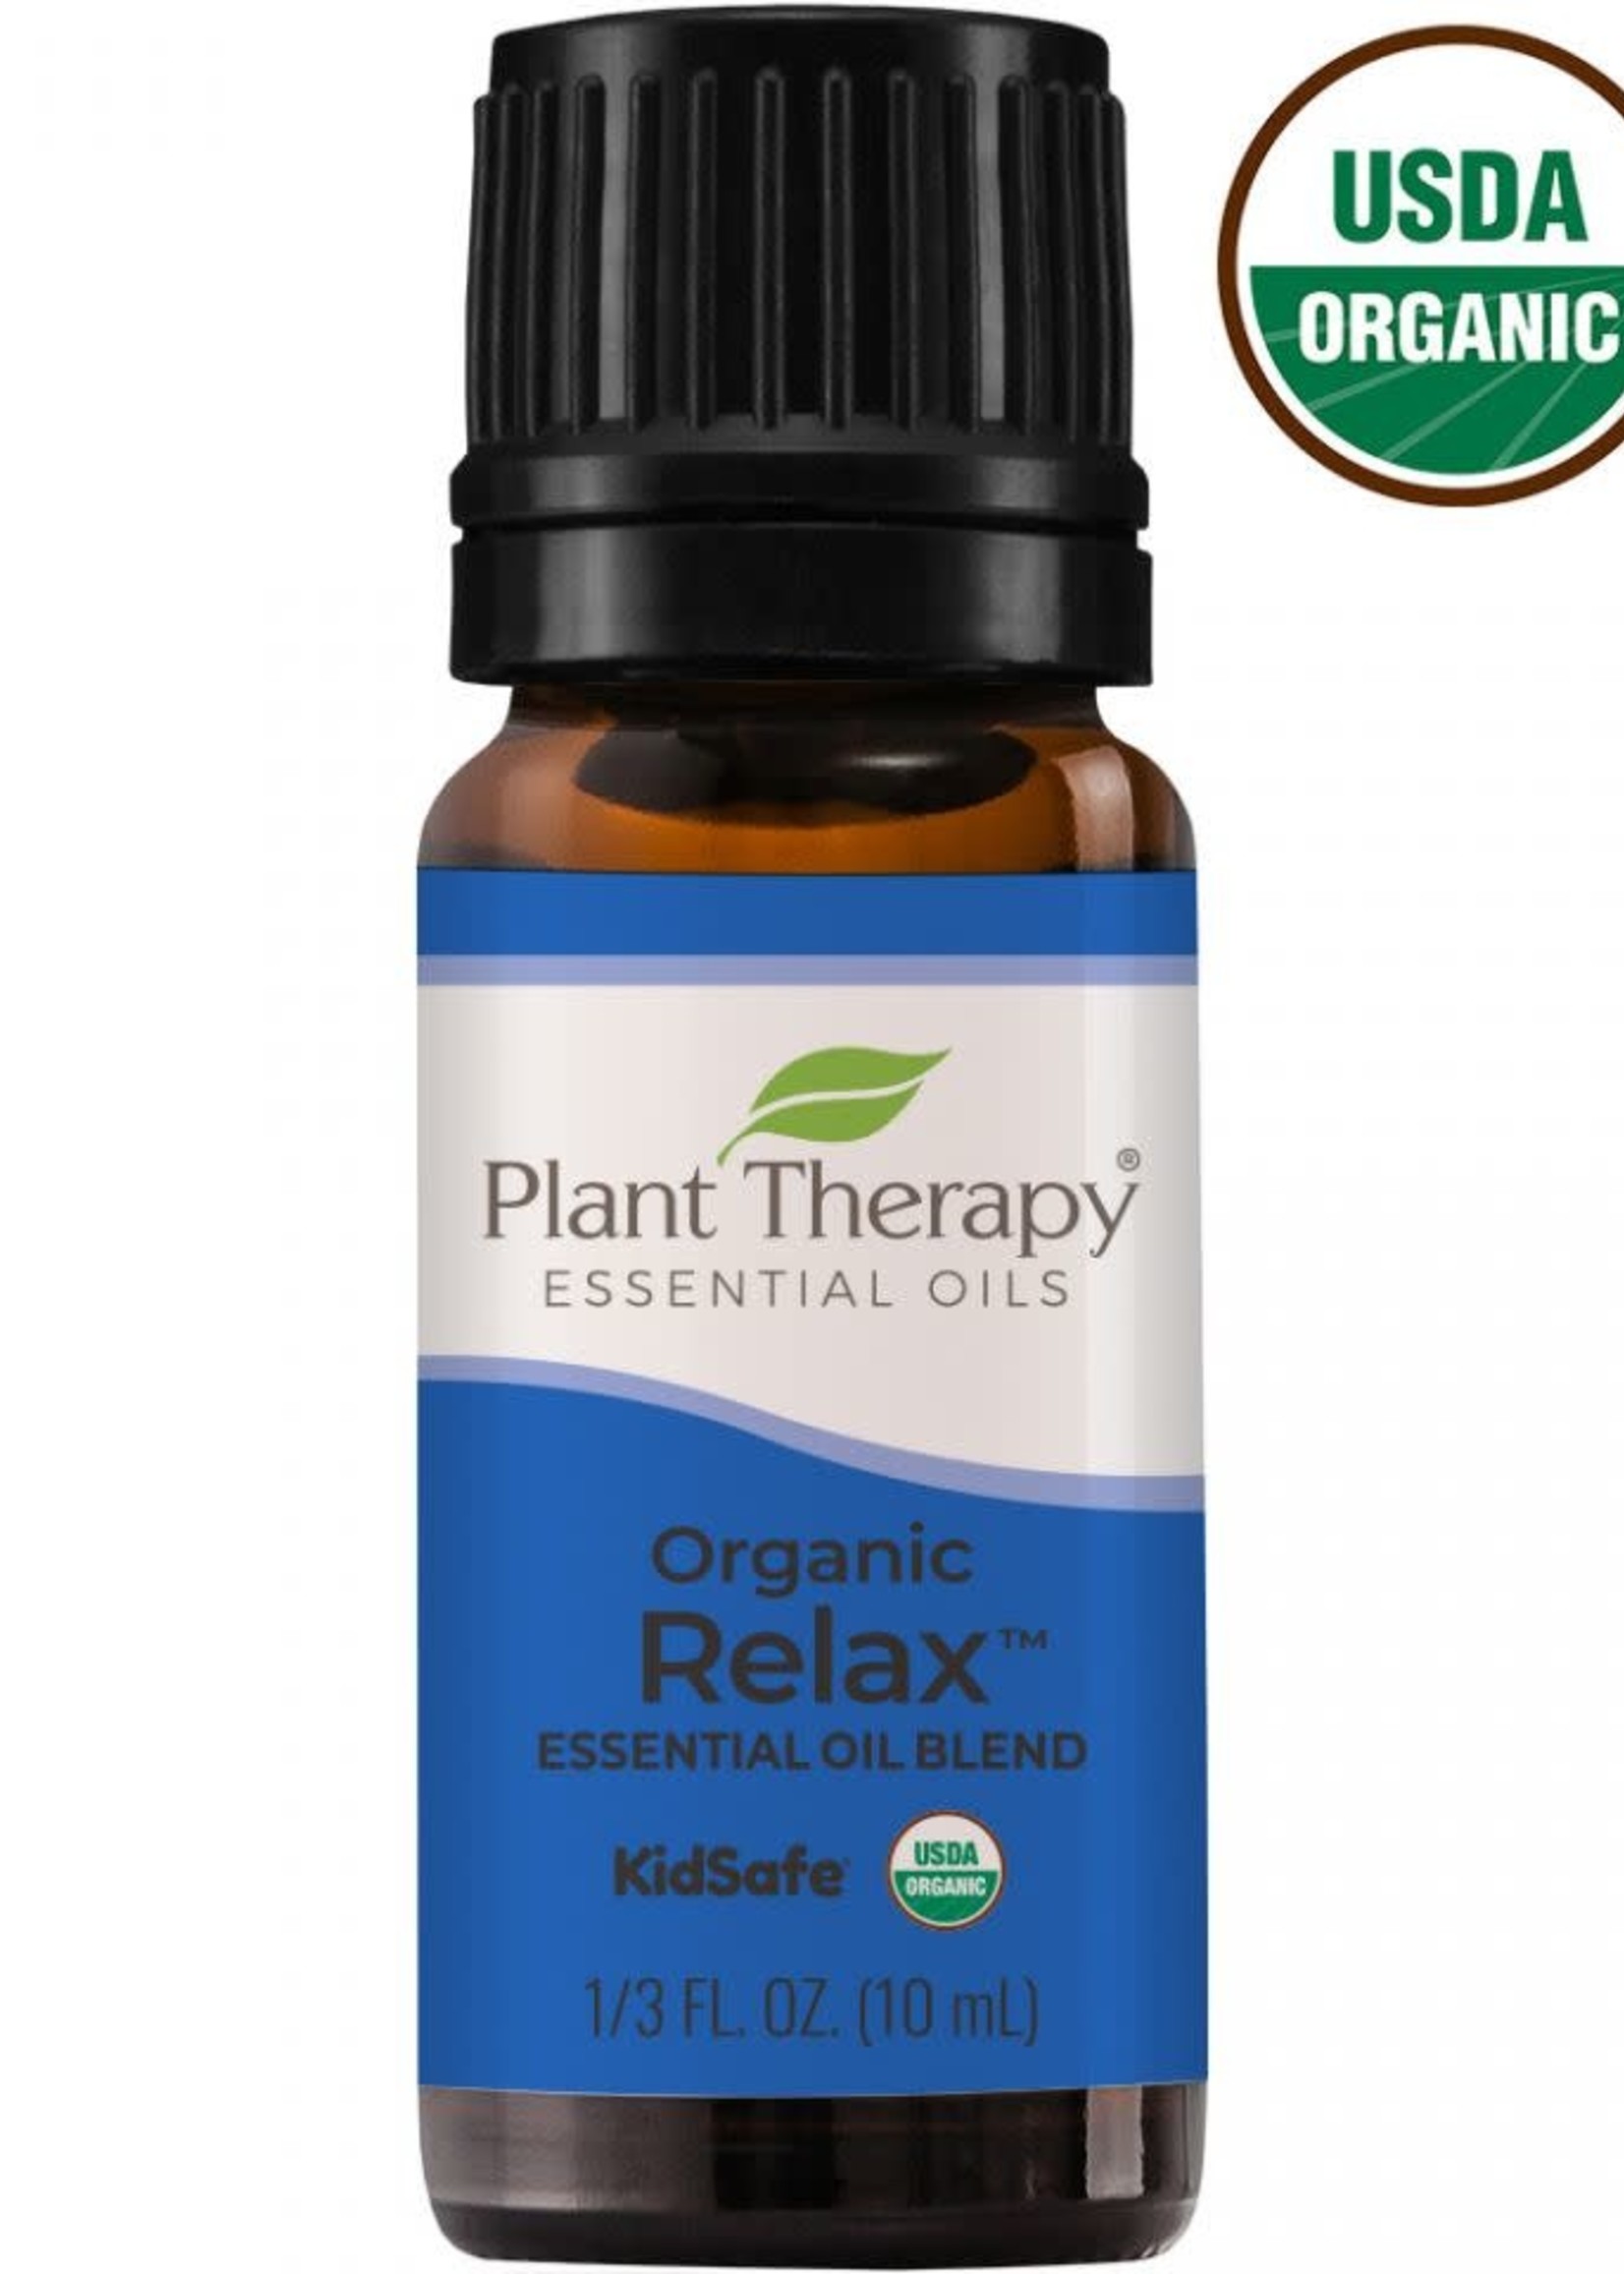 Plant Therapy Organic Relax Essential Oil